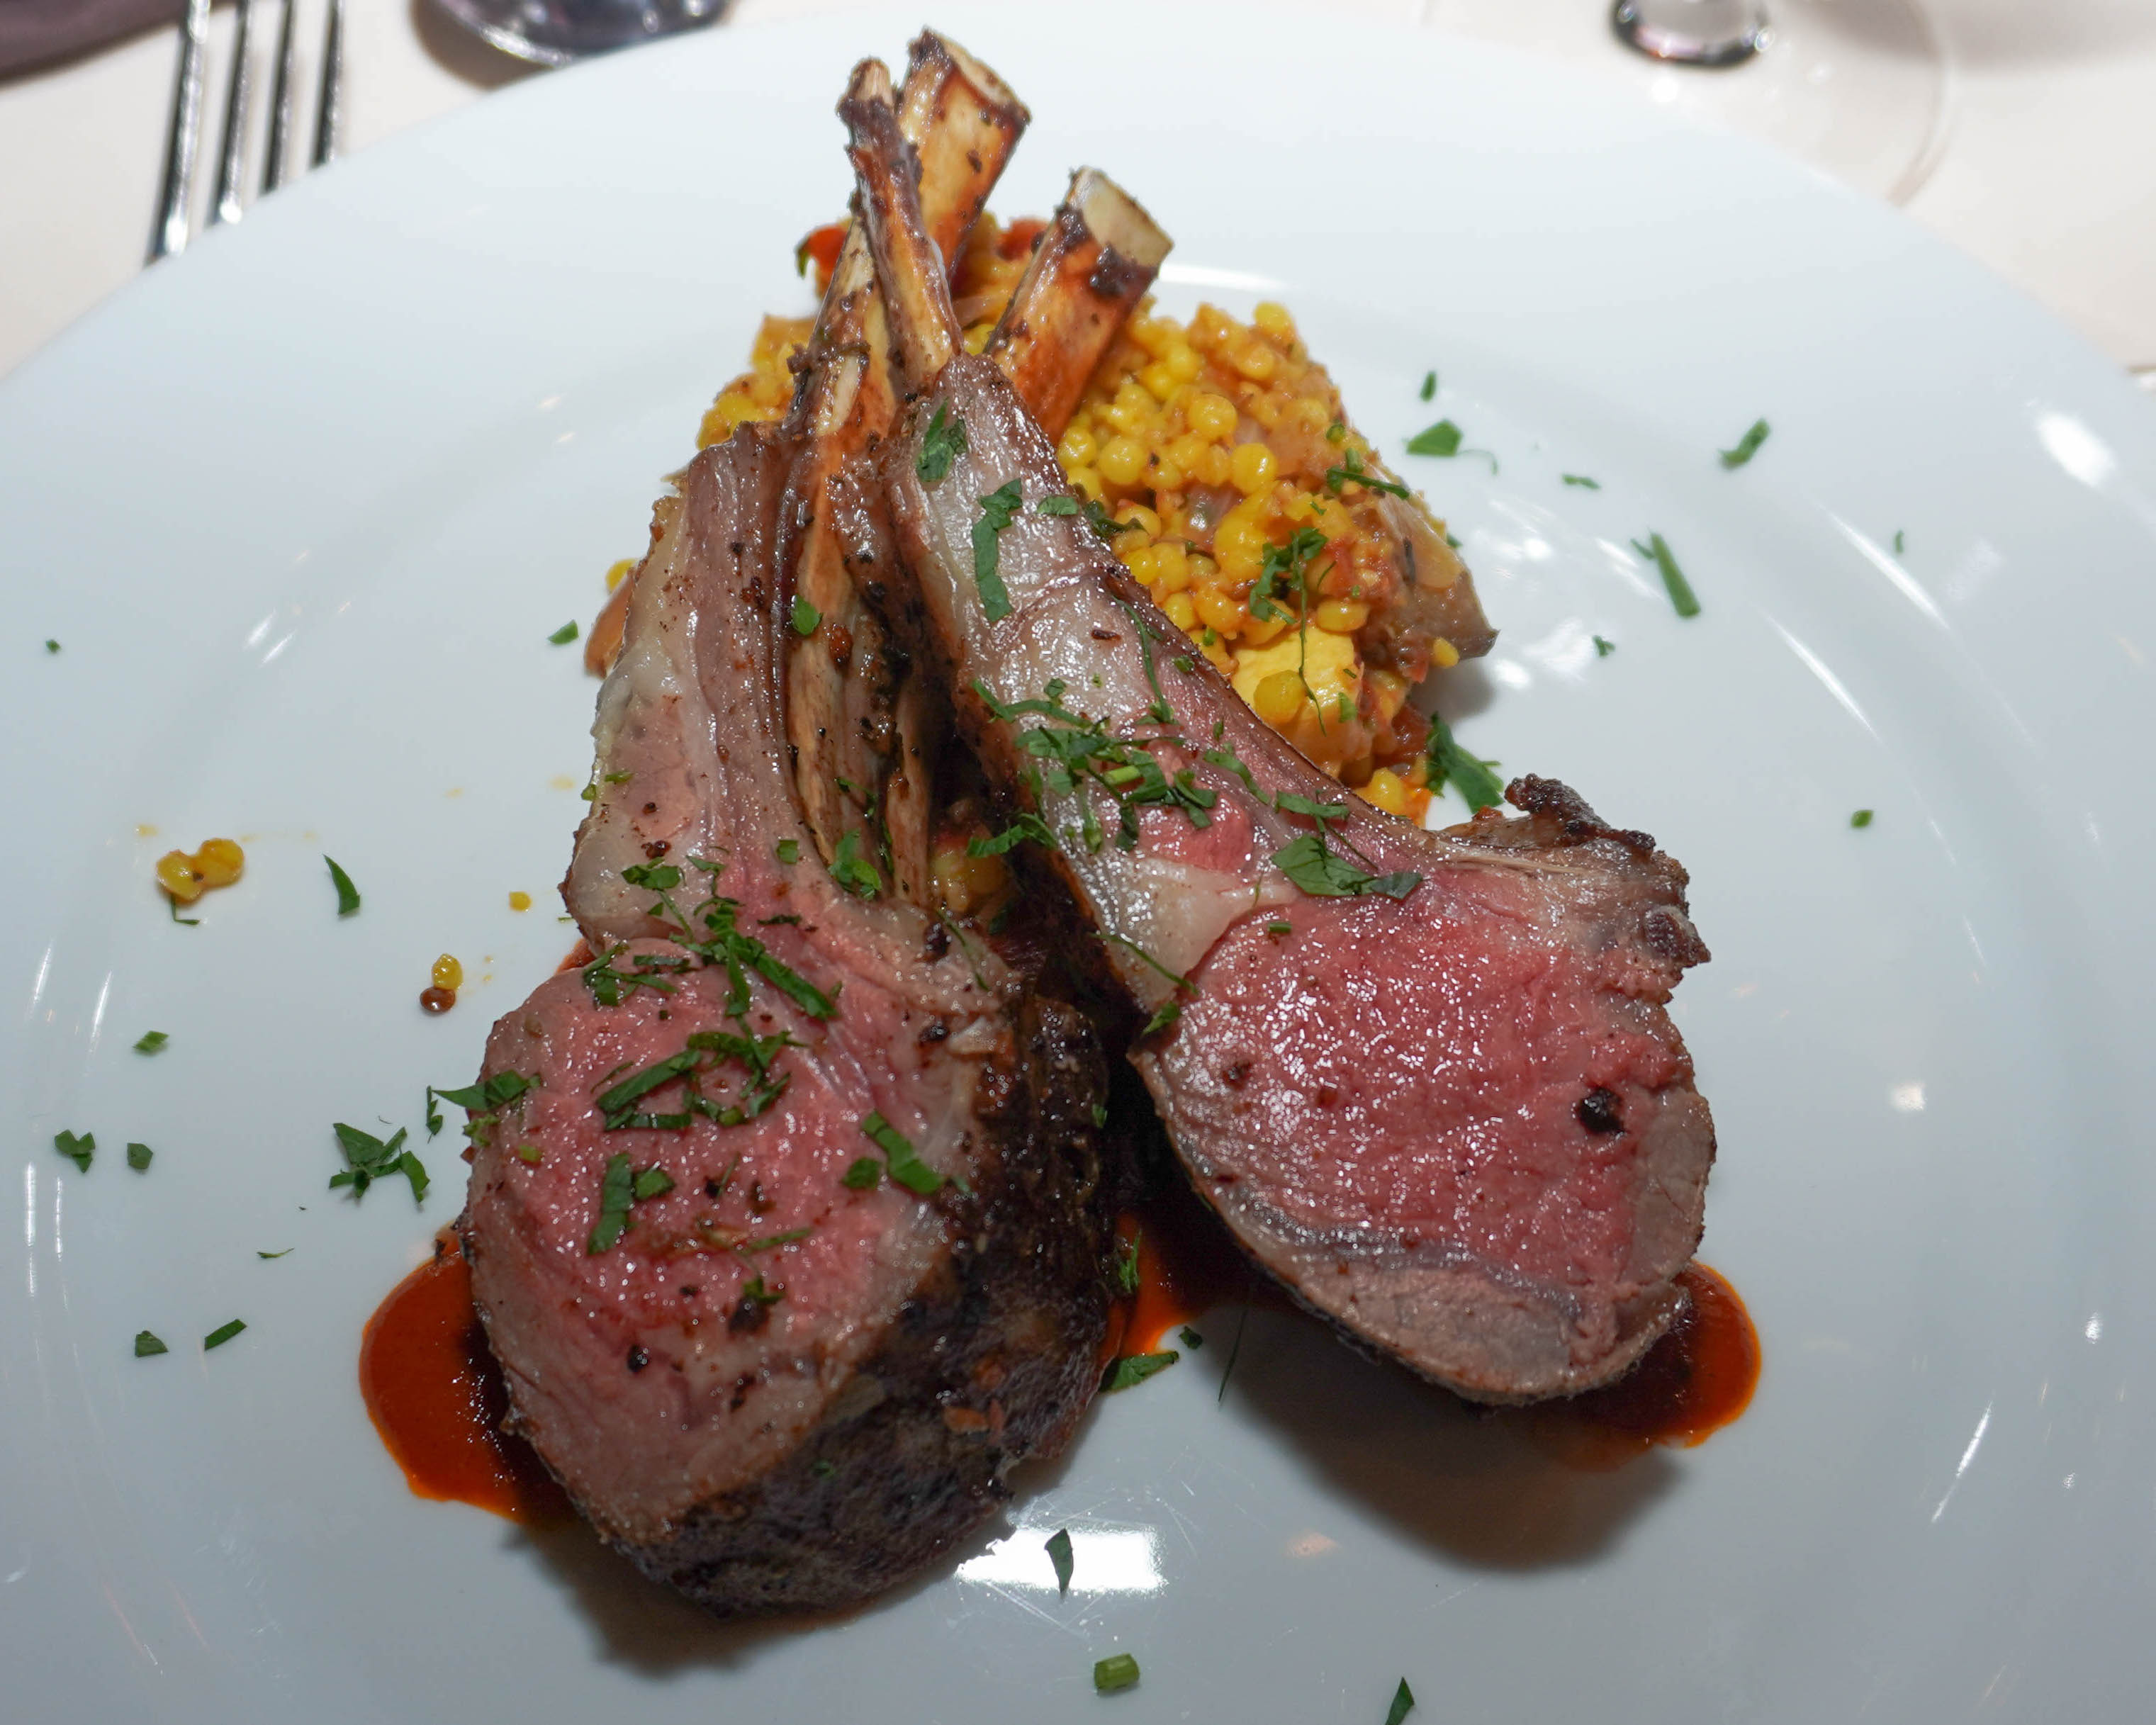 A photo of the mouth-watering Moroccan lamb rack.